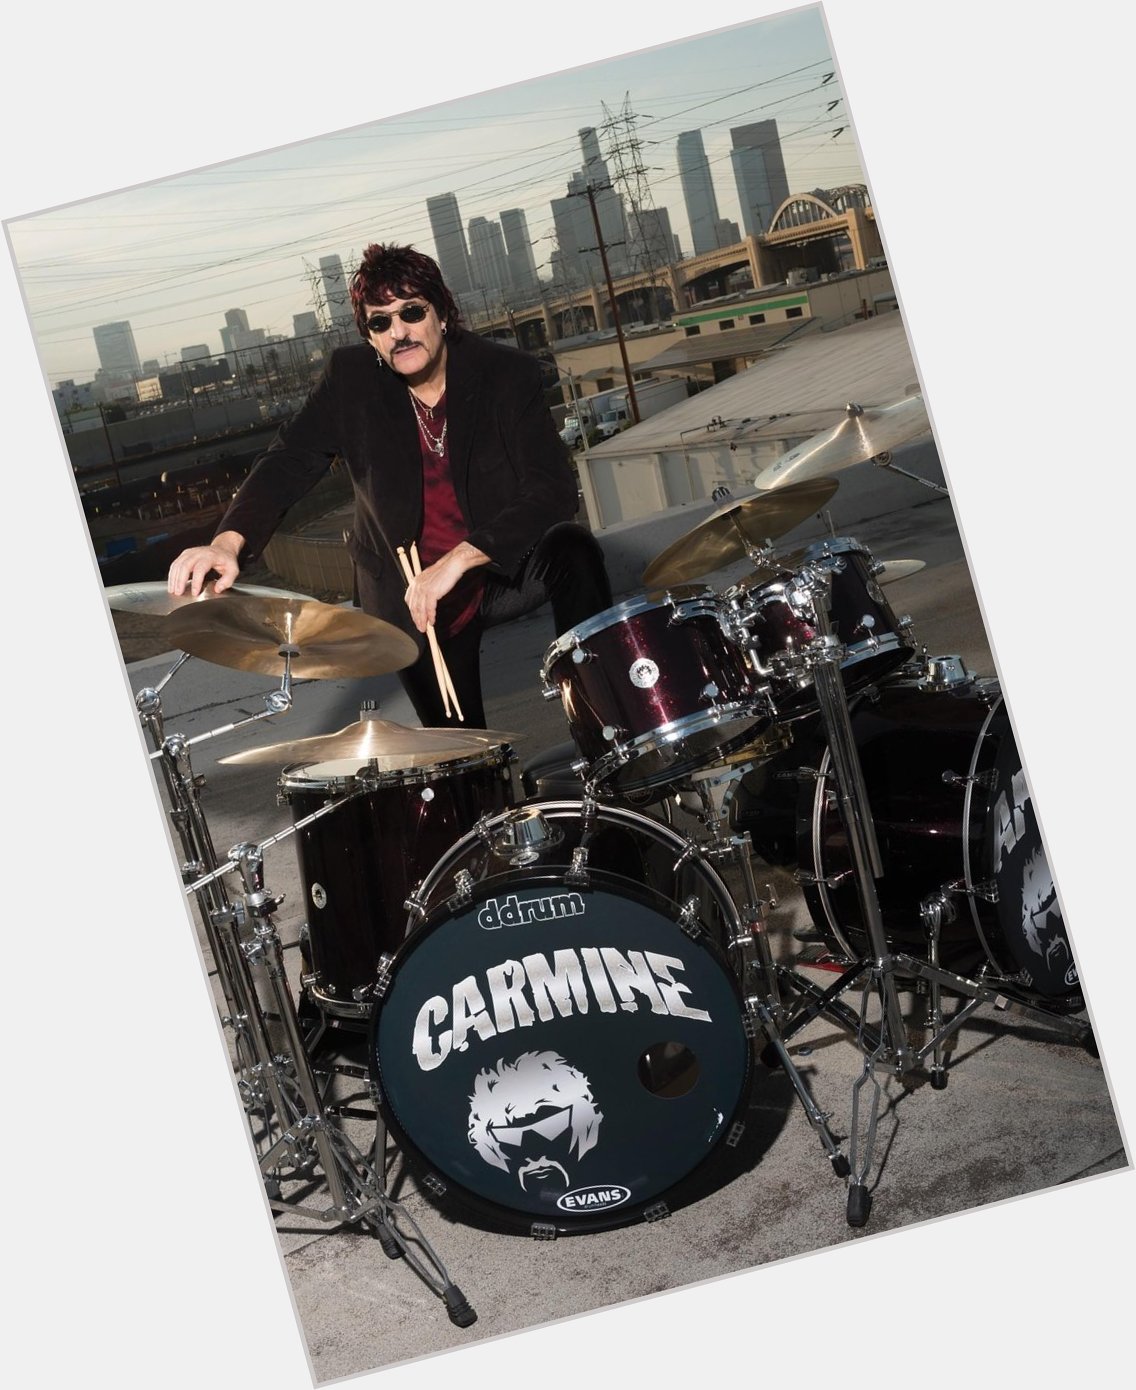 Wishing a big Happy Birthday to drumming legend and artist Carmine Appice.    